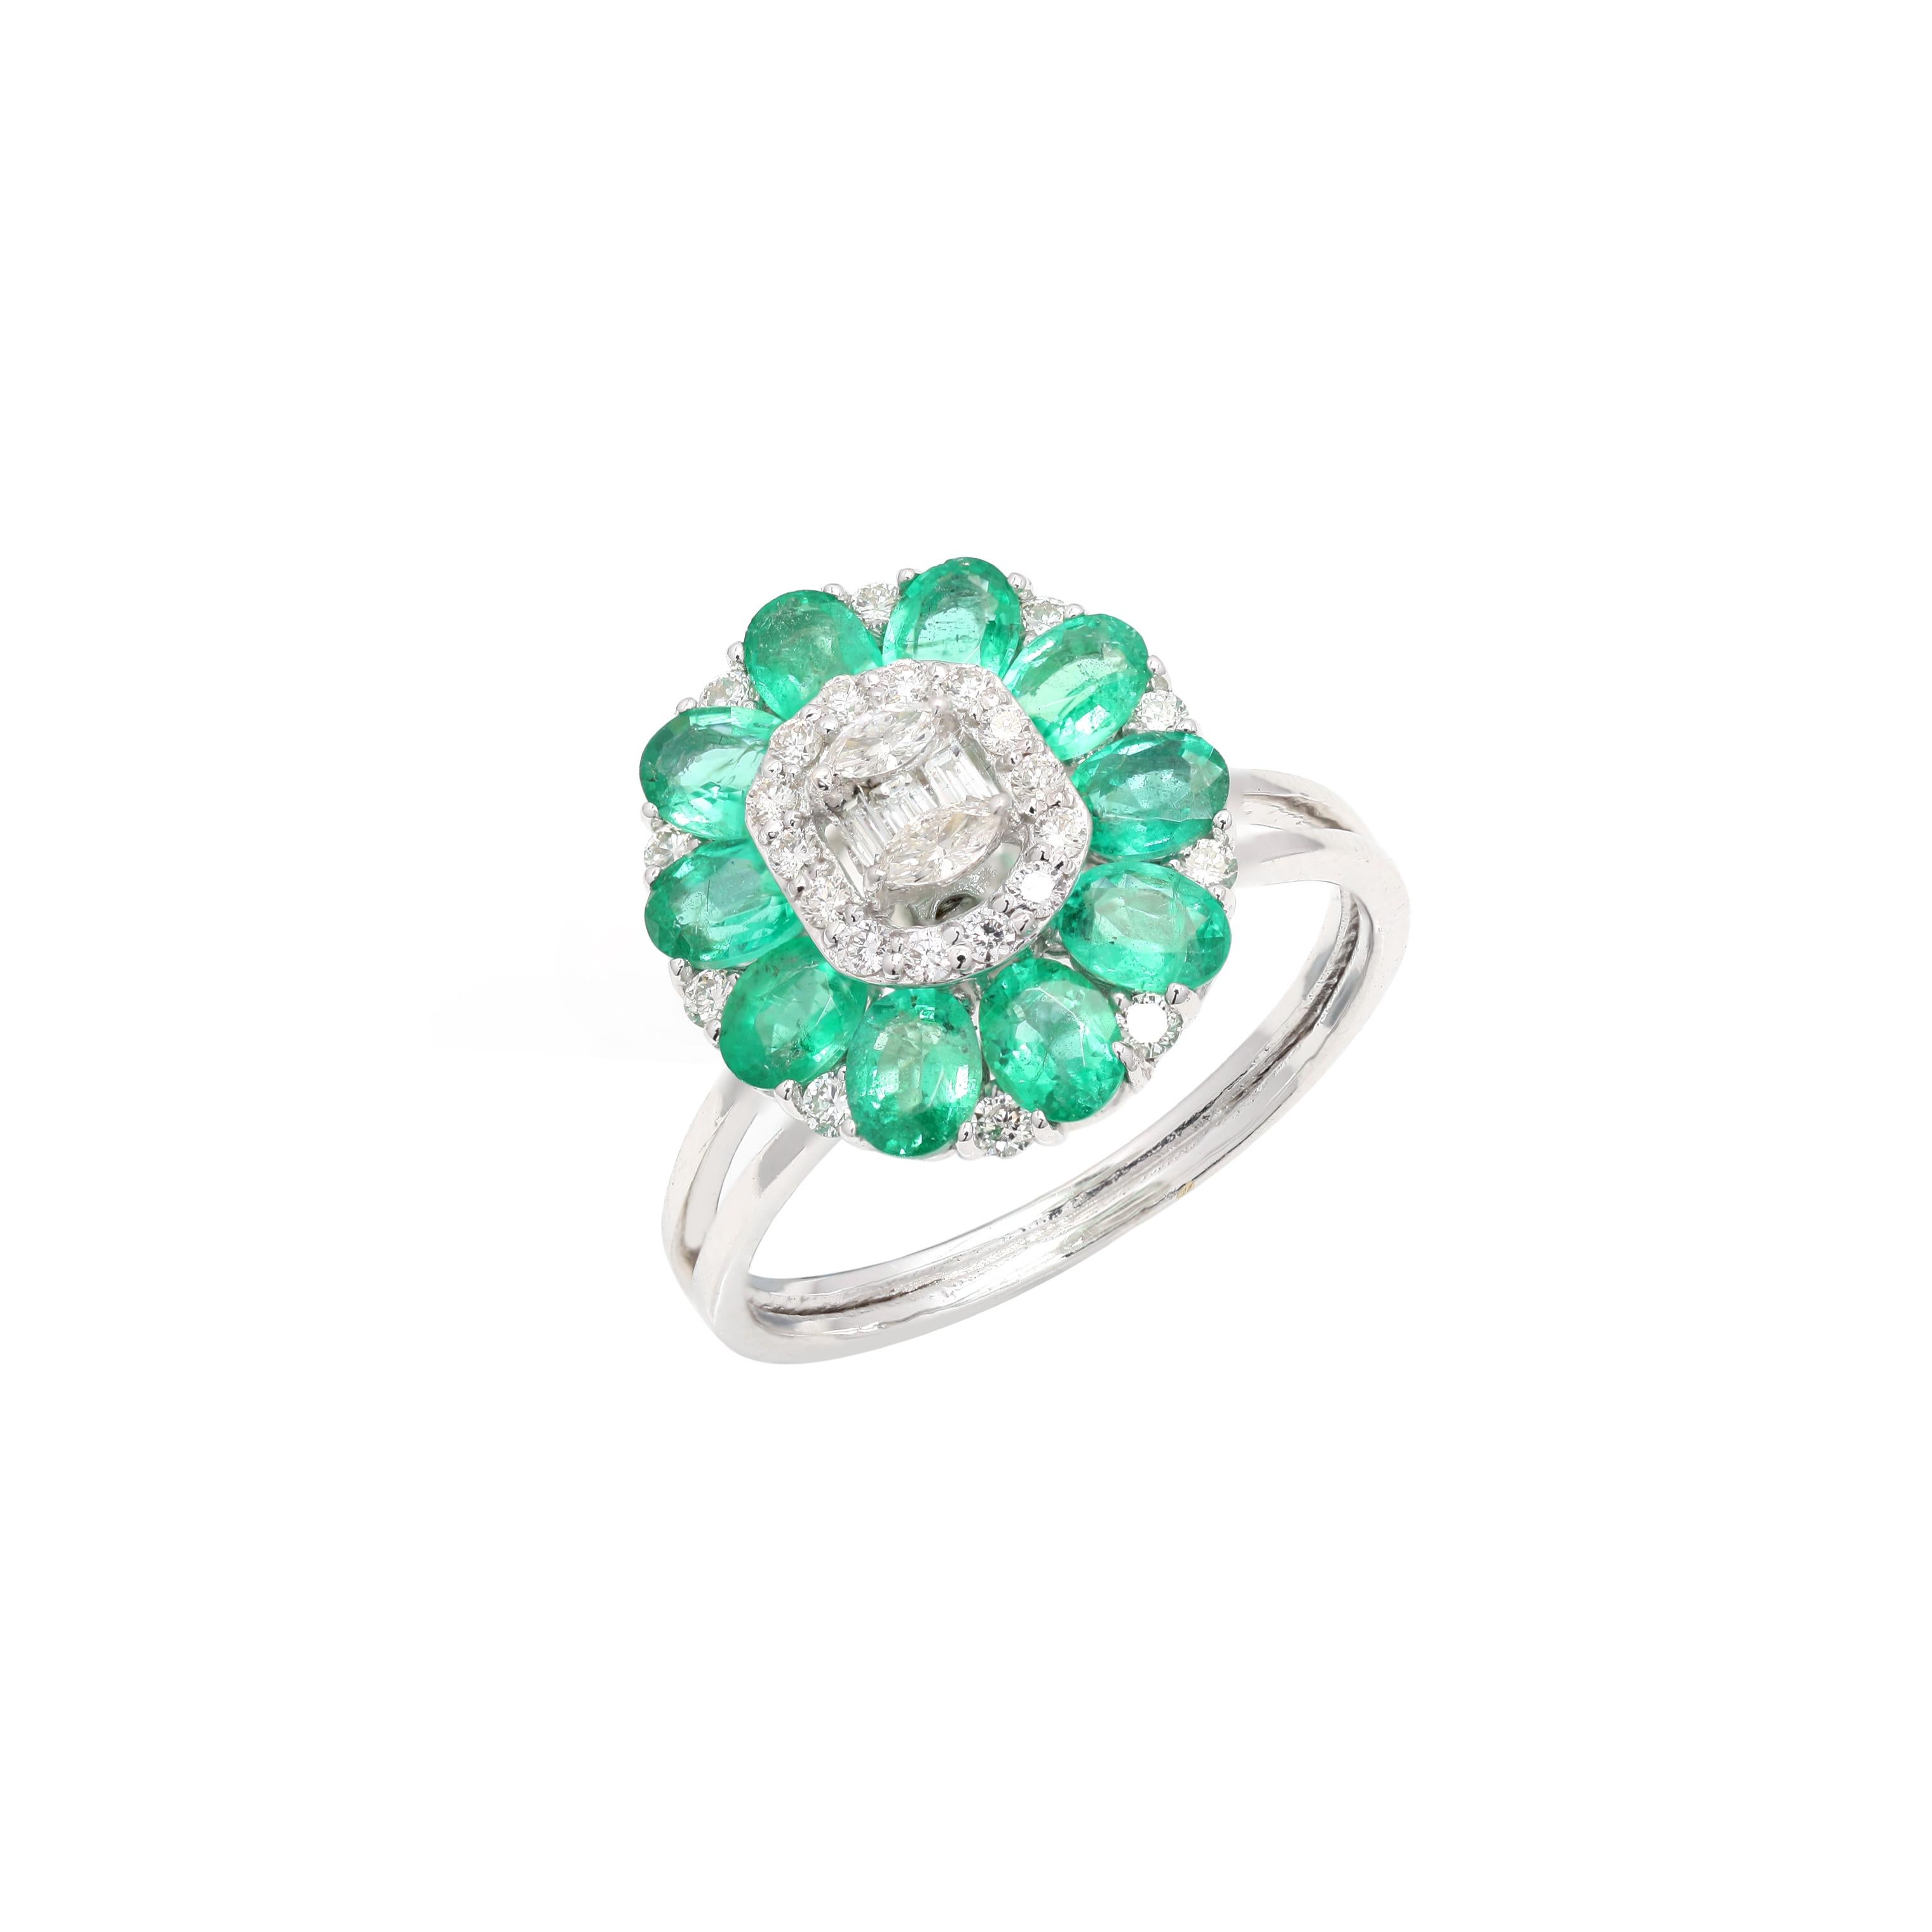 For Sale:  Fascinating Solid 18k White Gold Diamond and Emerald Statement Flower Ring 2